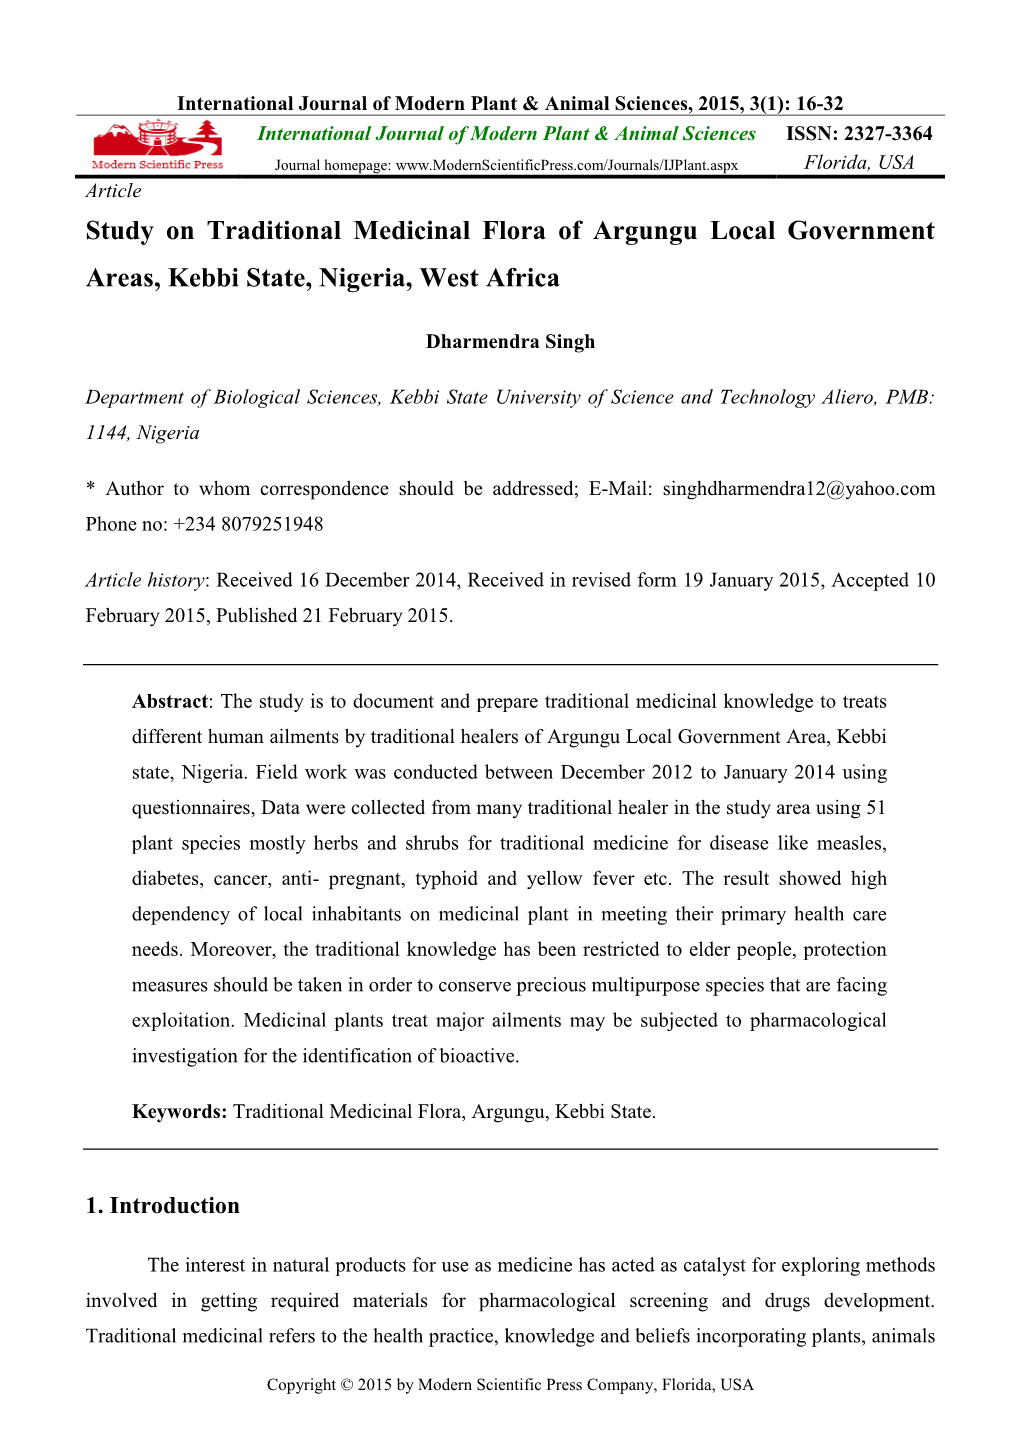 Study on Traditional Medicinal Flora of Argungu Local Government Areas, Kebbi State, Nigeria, West Africa